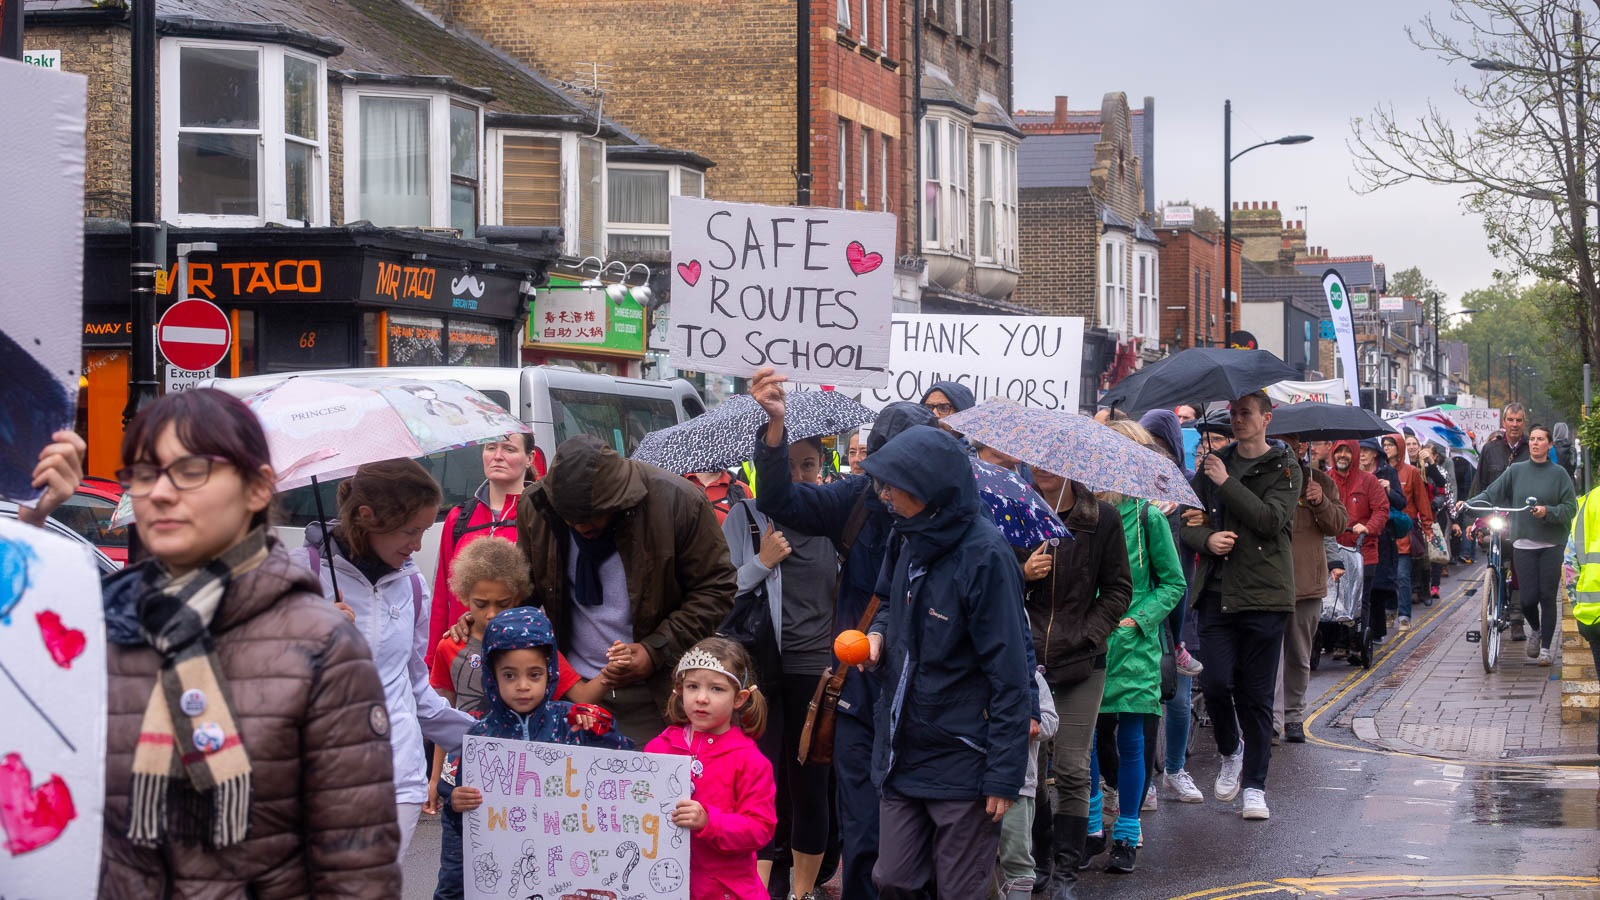 Hundreds turn out to campaign for traffic restrictions that residents say will improve immeasurably life in the Mill Road area of Cambridge